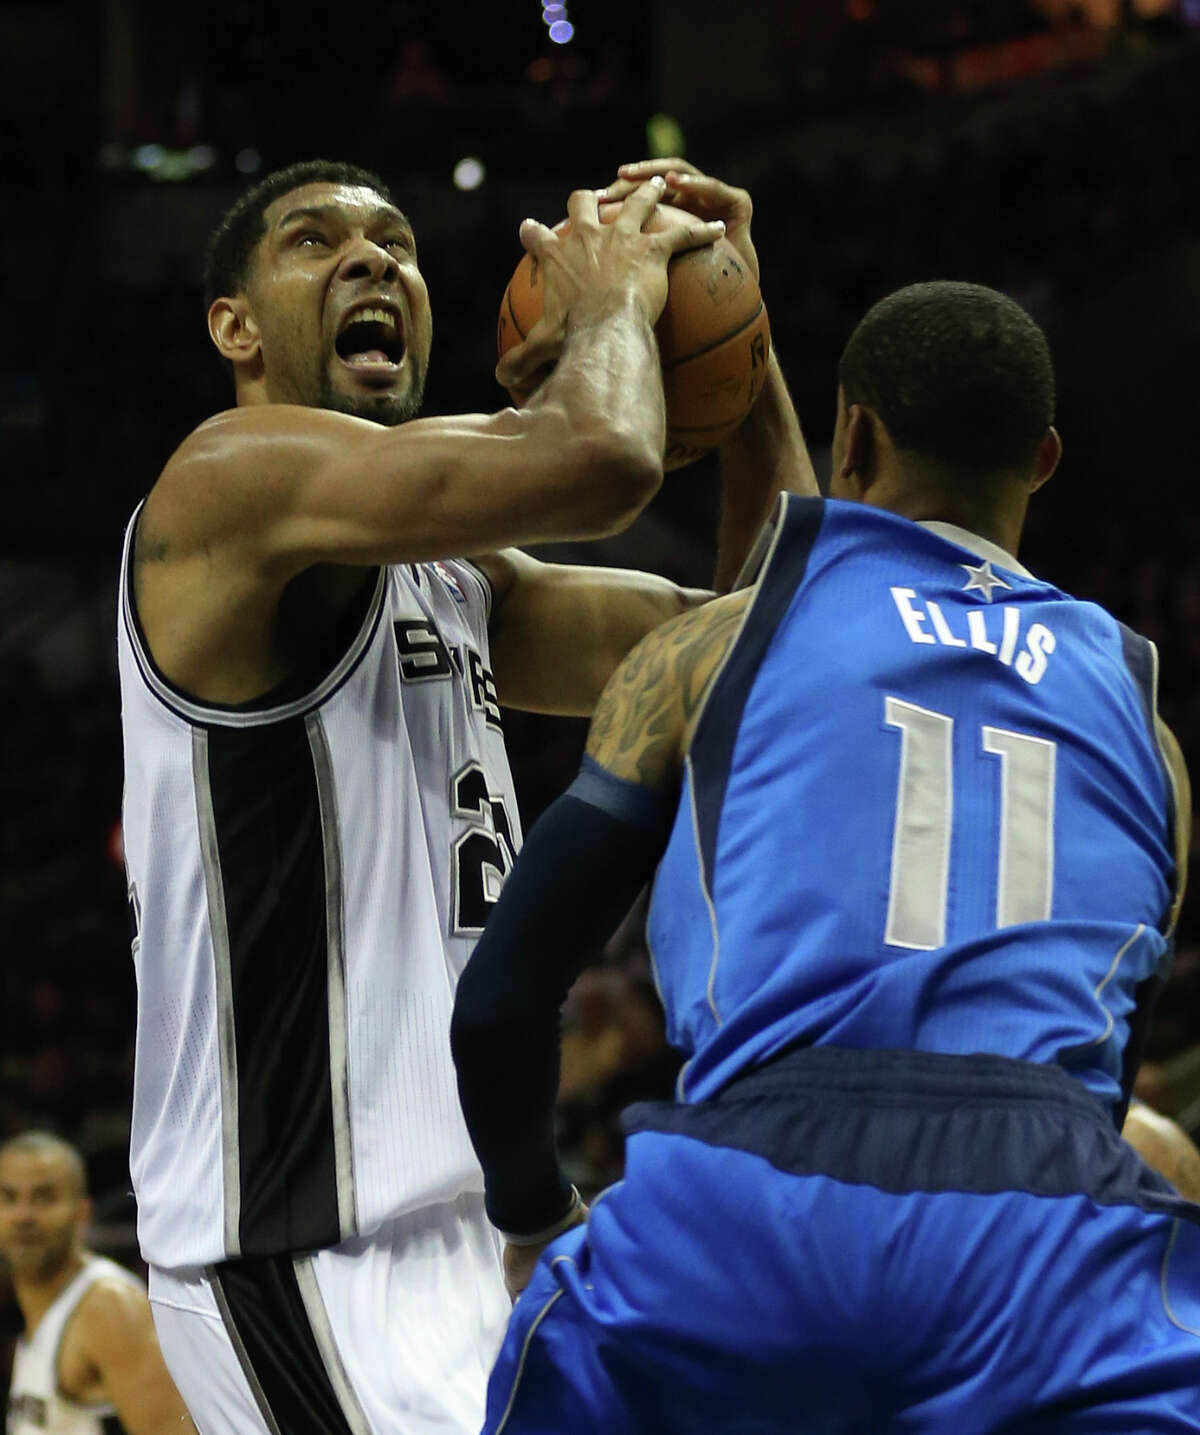 San Antonio Spurs' Tim Duncan drives around the defense of Dallas Mavericks' Monta Ellis during the first half of game one in the first round of the Western Conference Playoffs at the AT&T Center, Sunday, April 20, 2014.